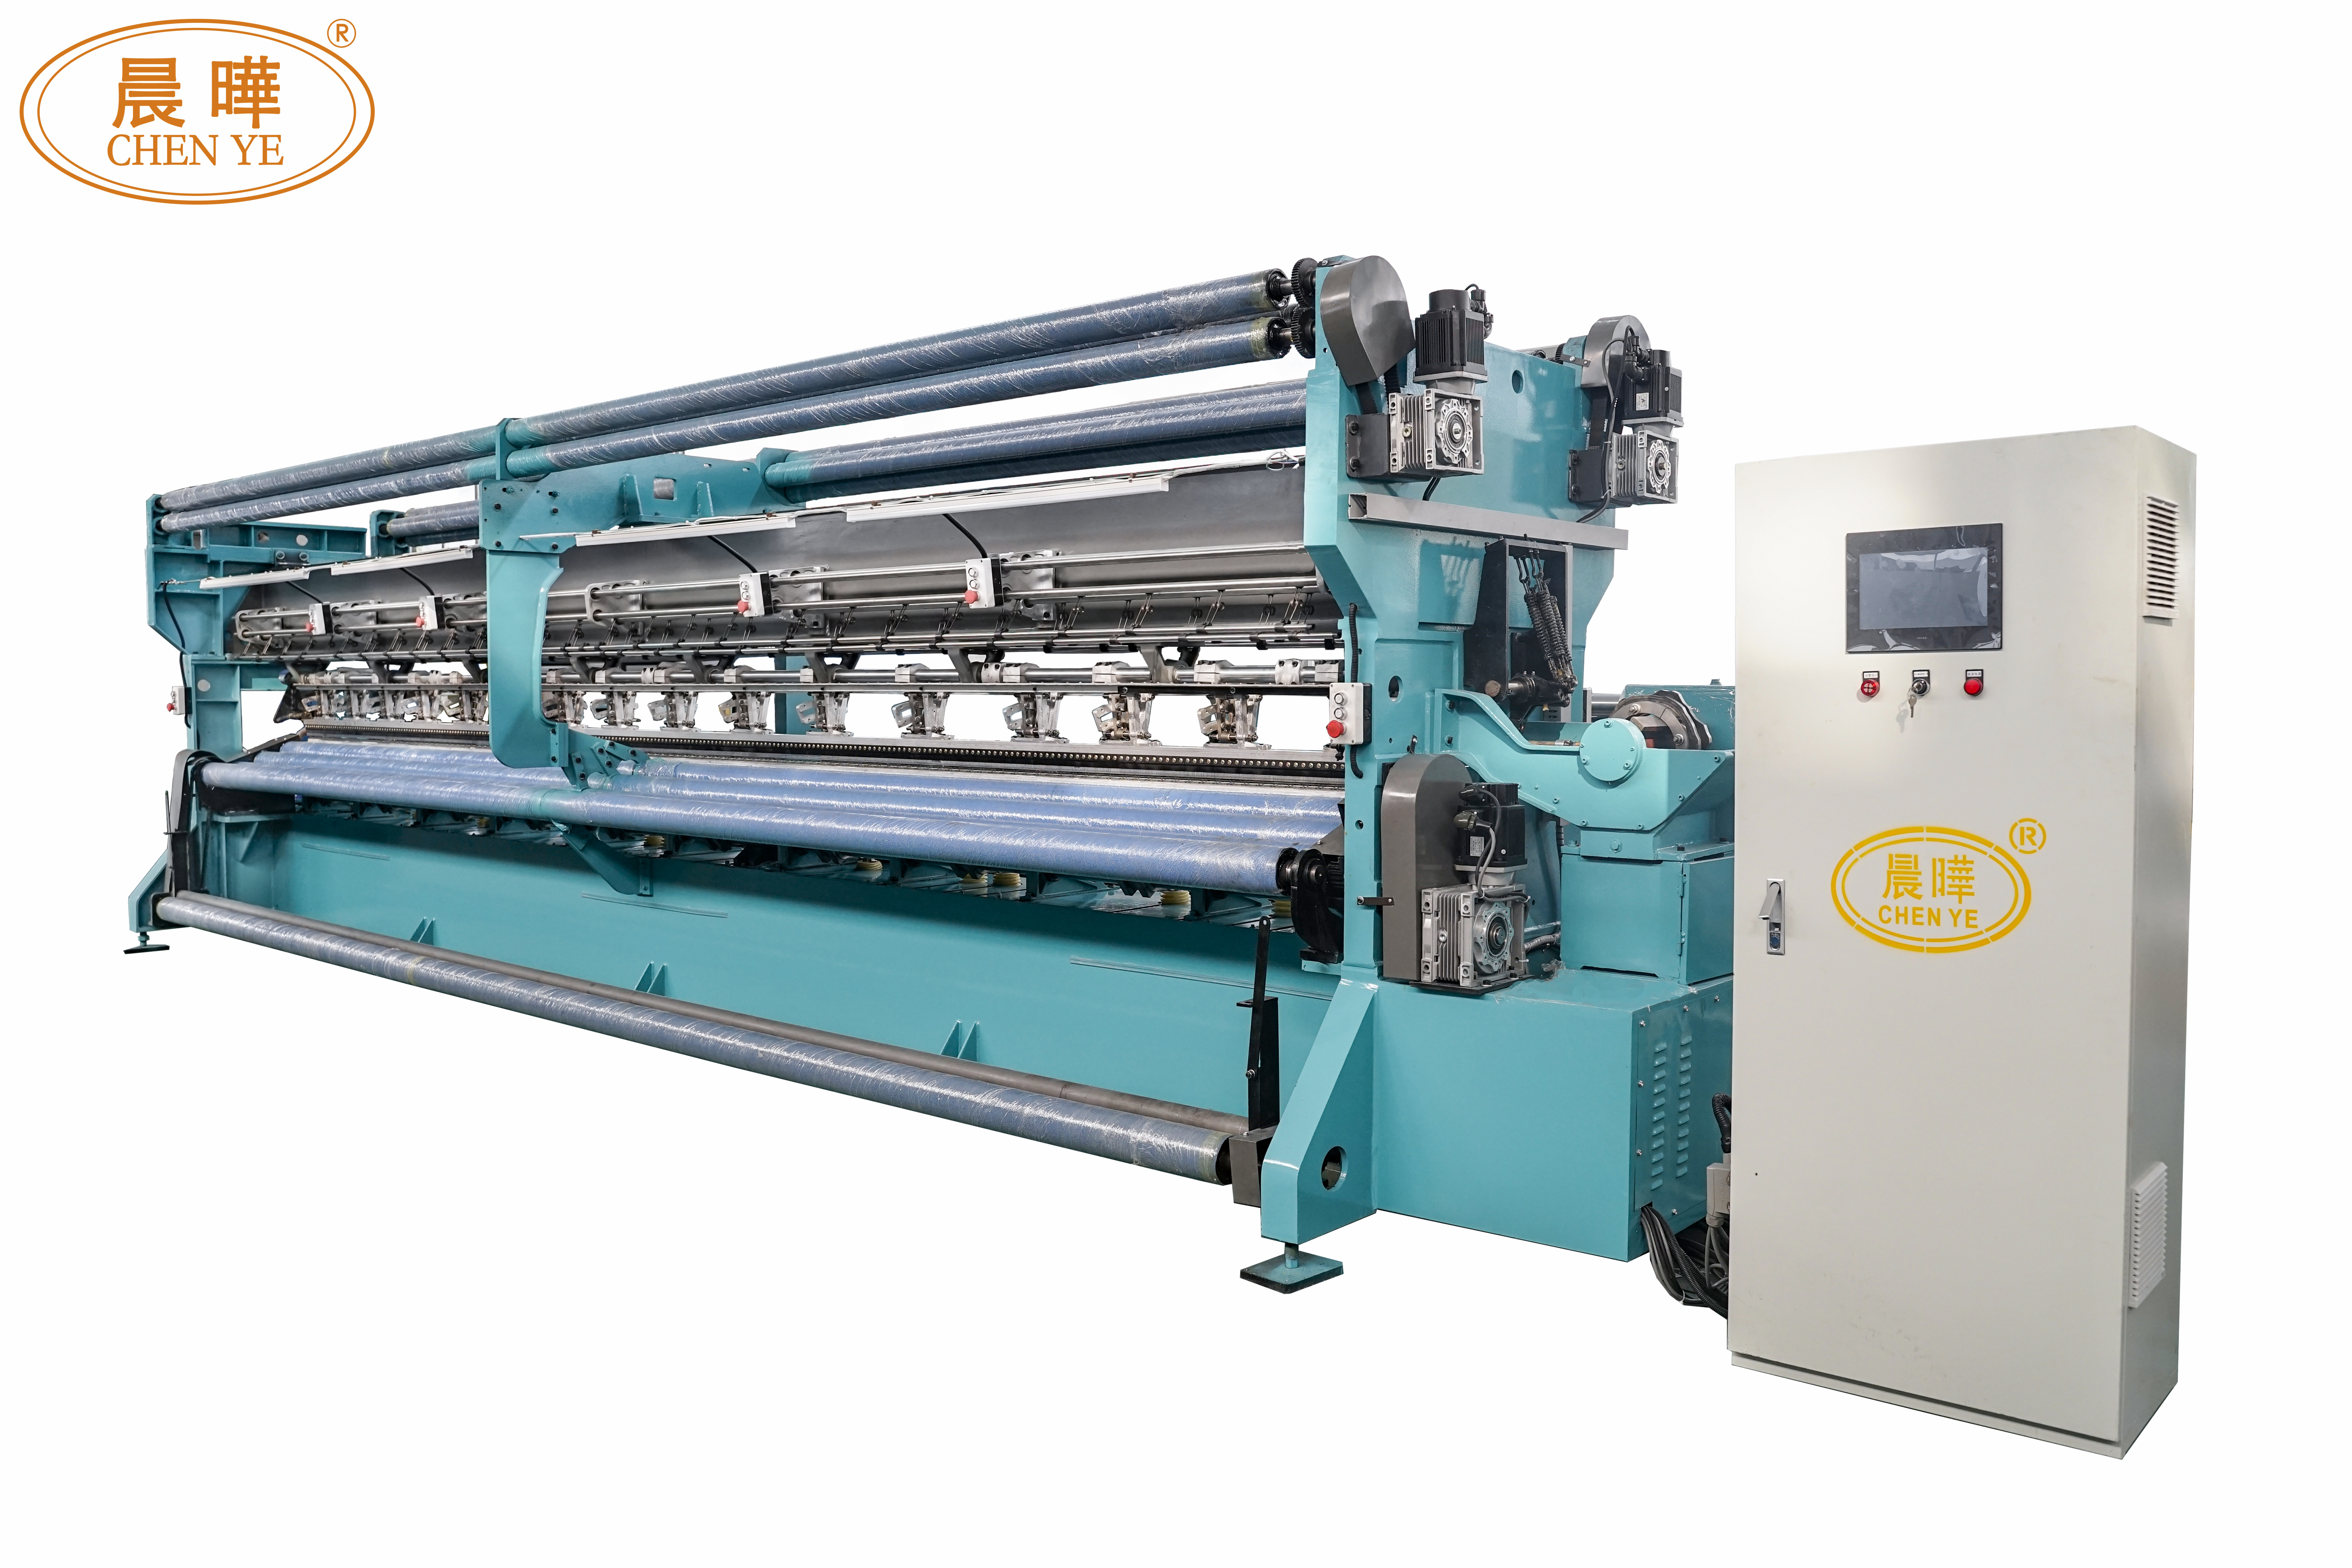 How to care for and maintain Raschel machine